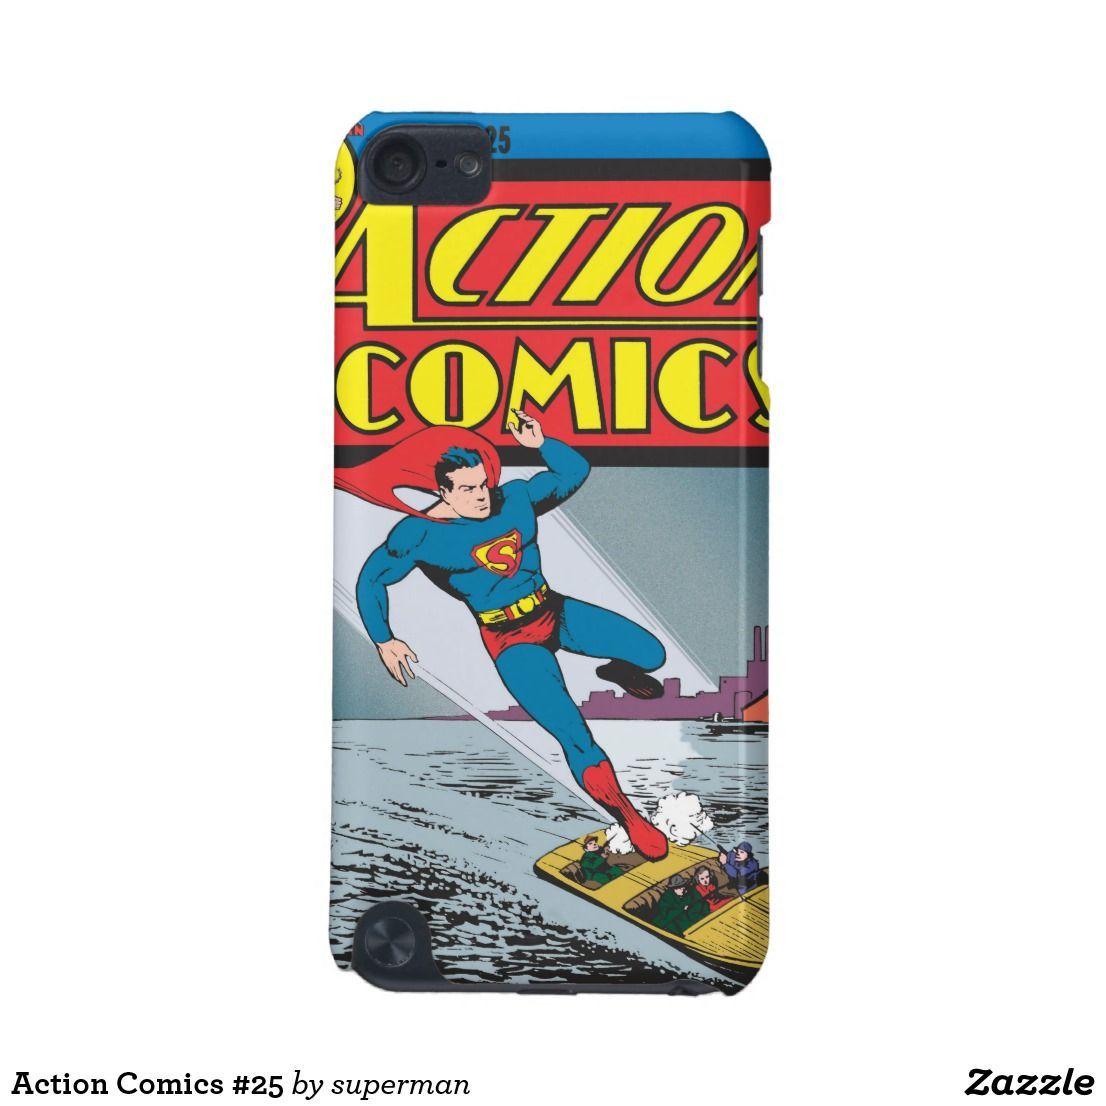 5th Comic Book Style Logo - Action Comics iPod Touch (5th Generation) Cover. Superman